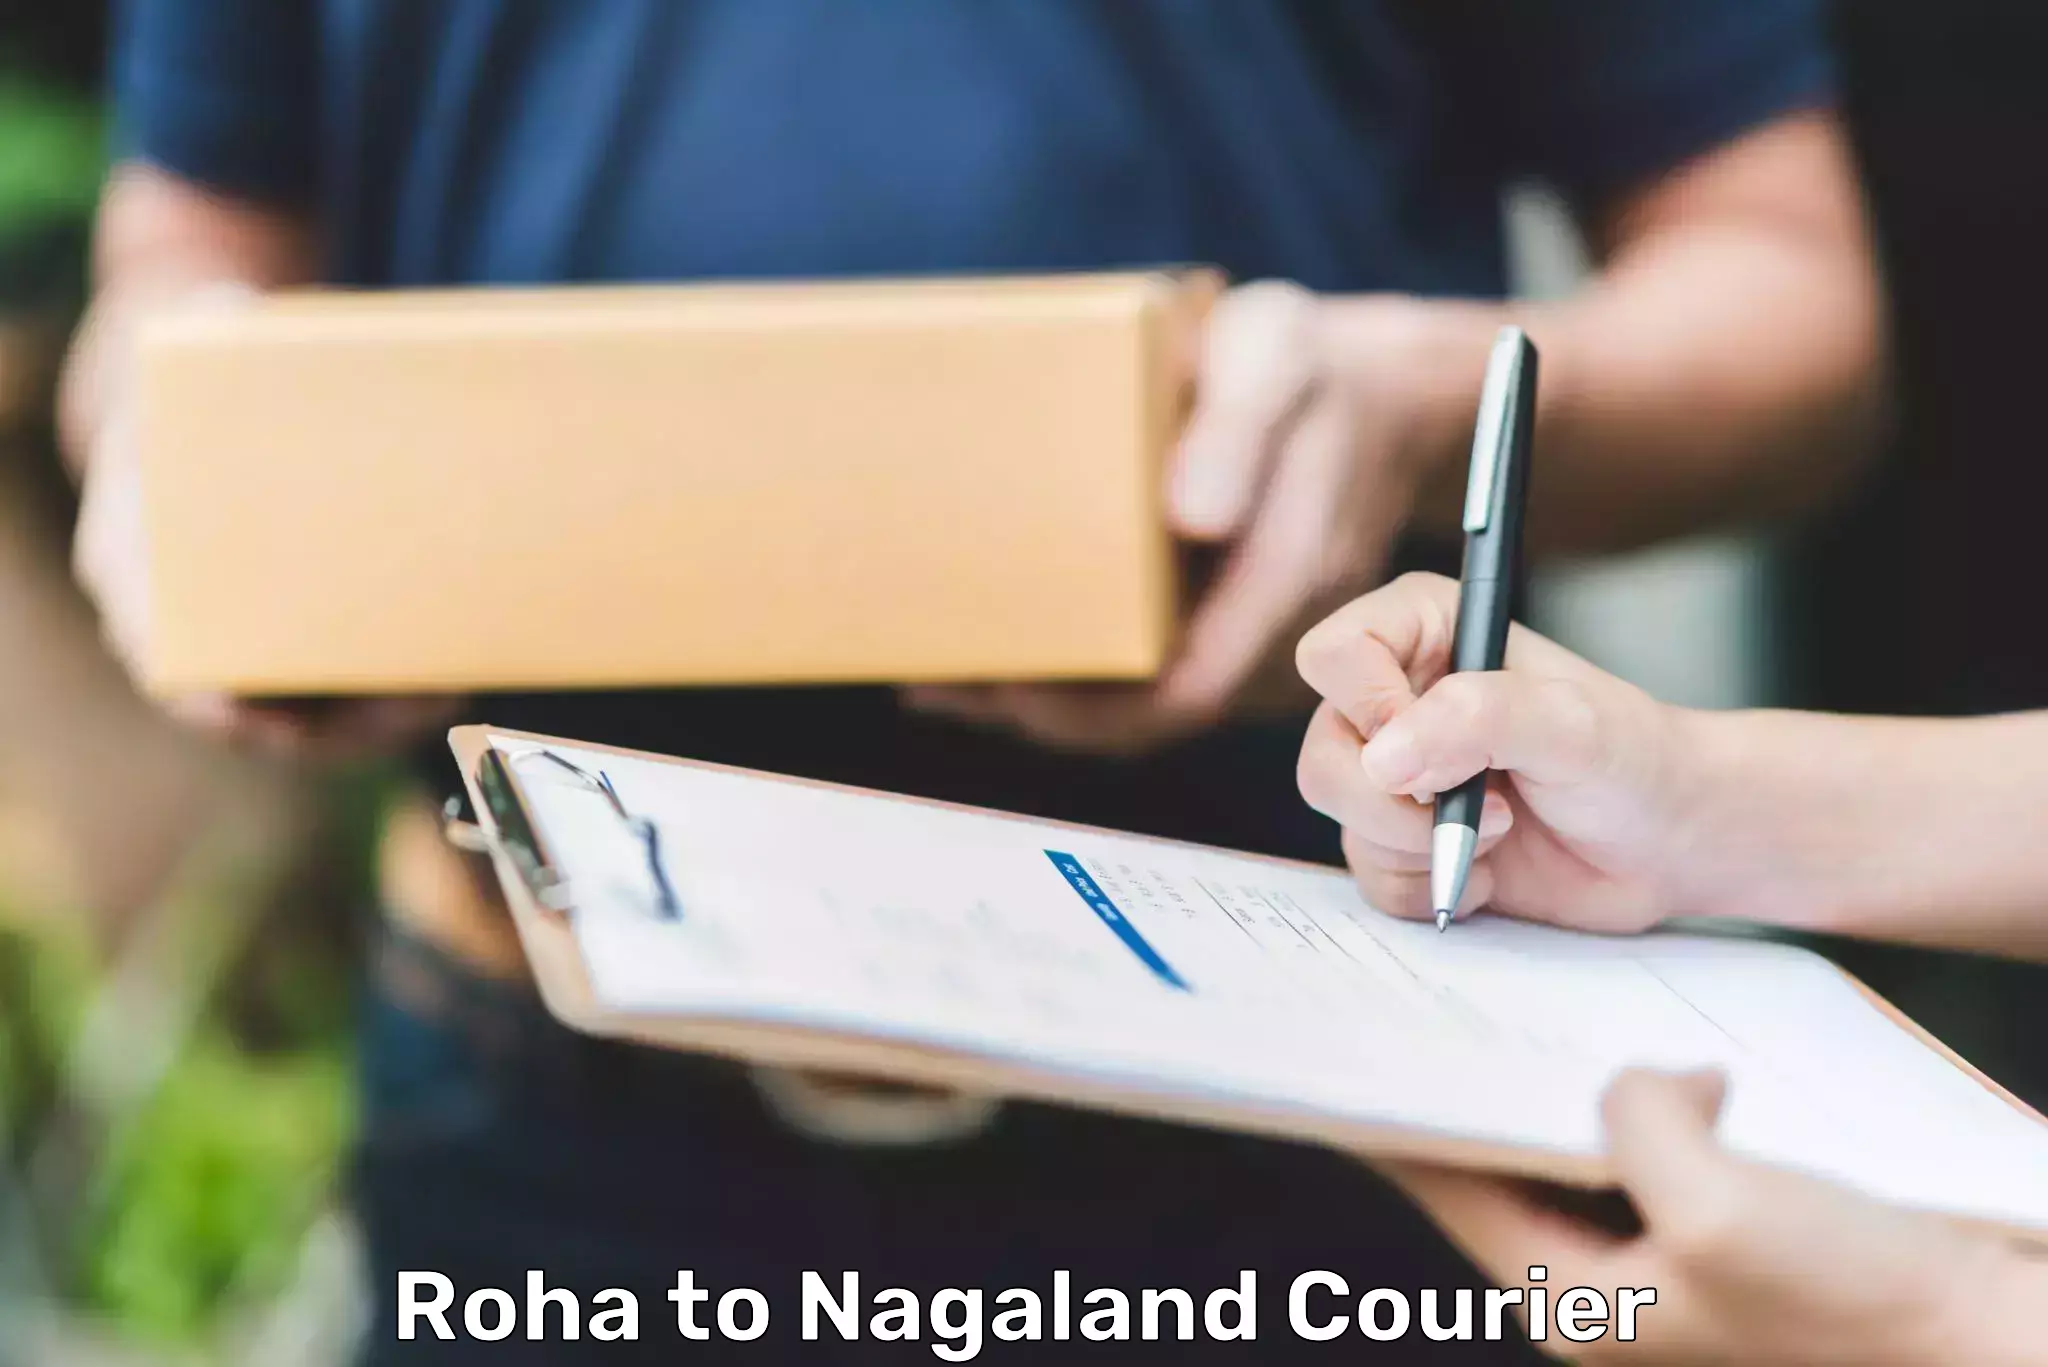 Nationwide parcel services Roha to Nagaland